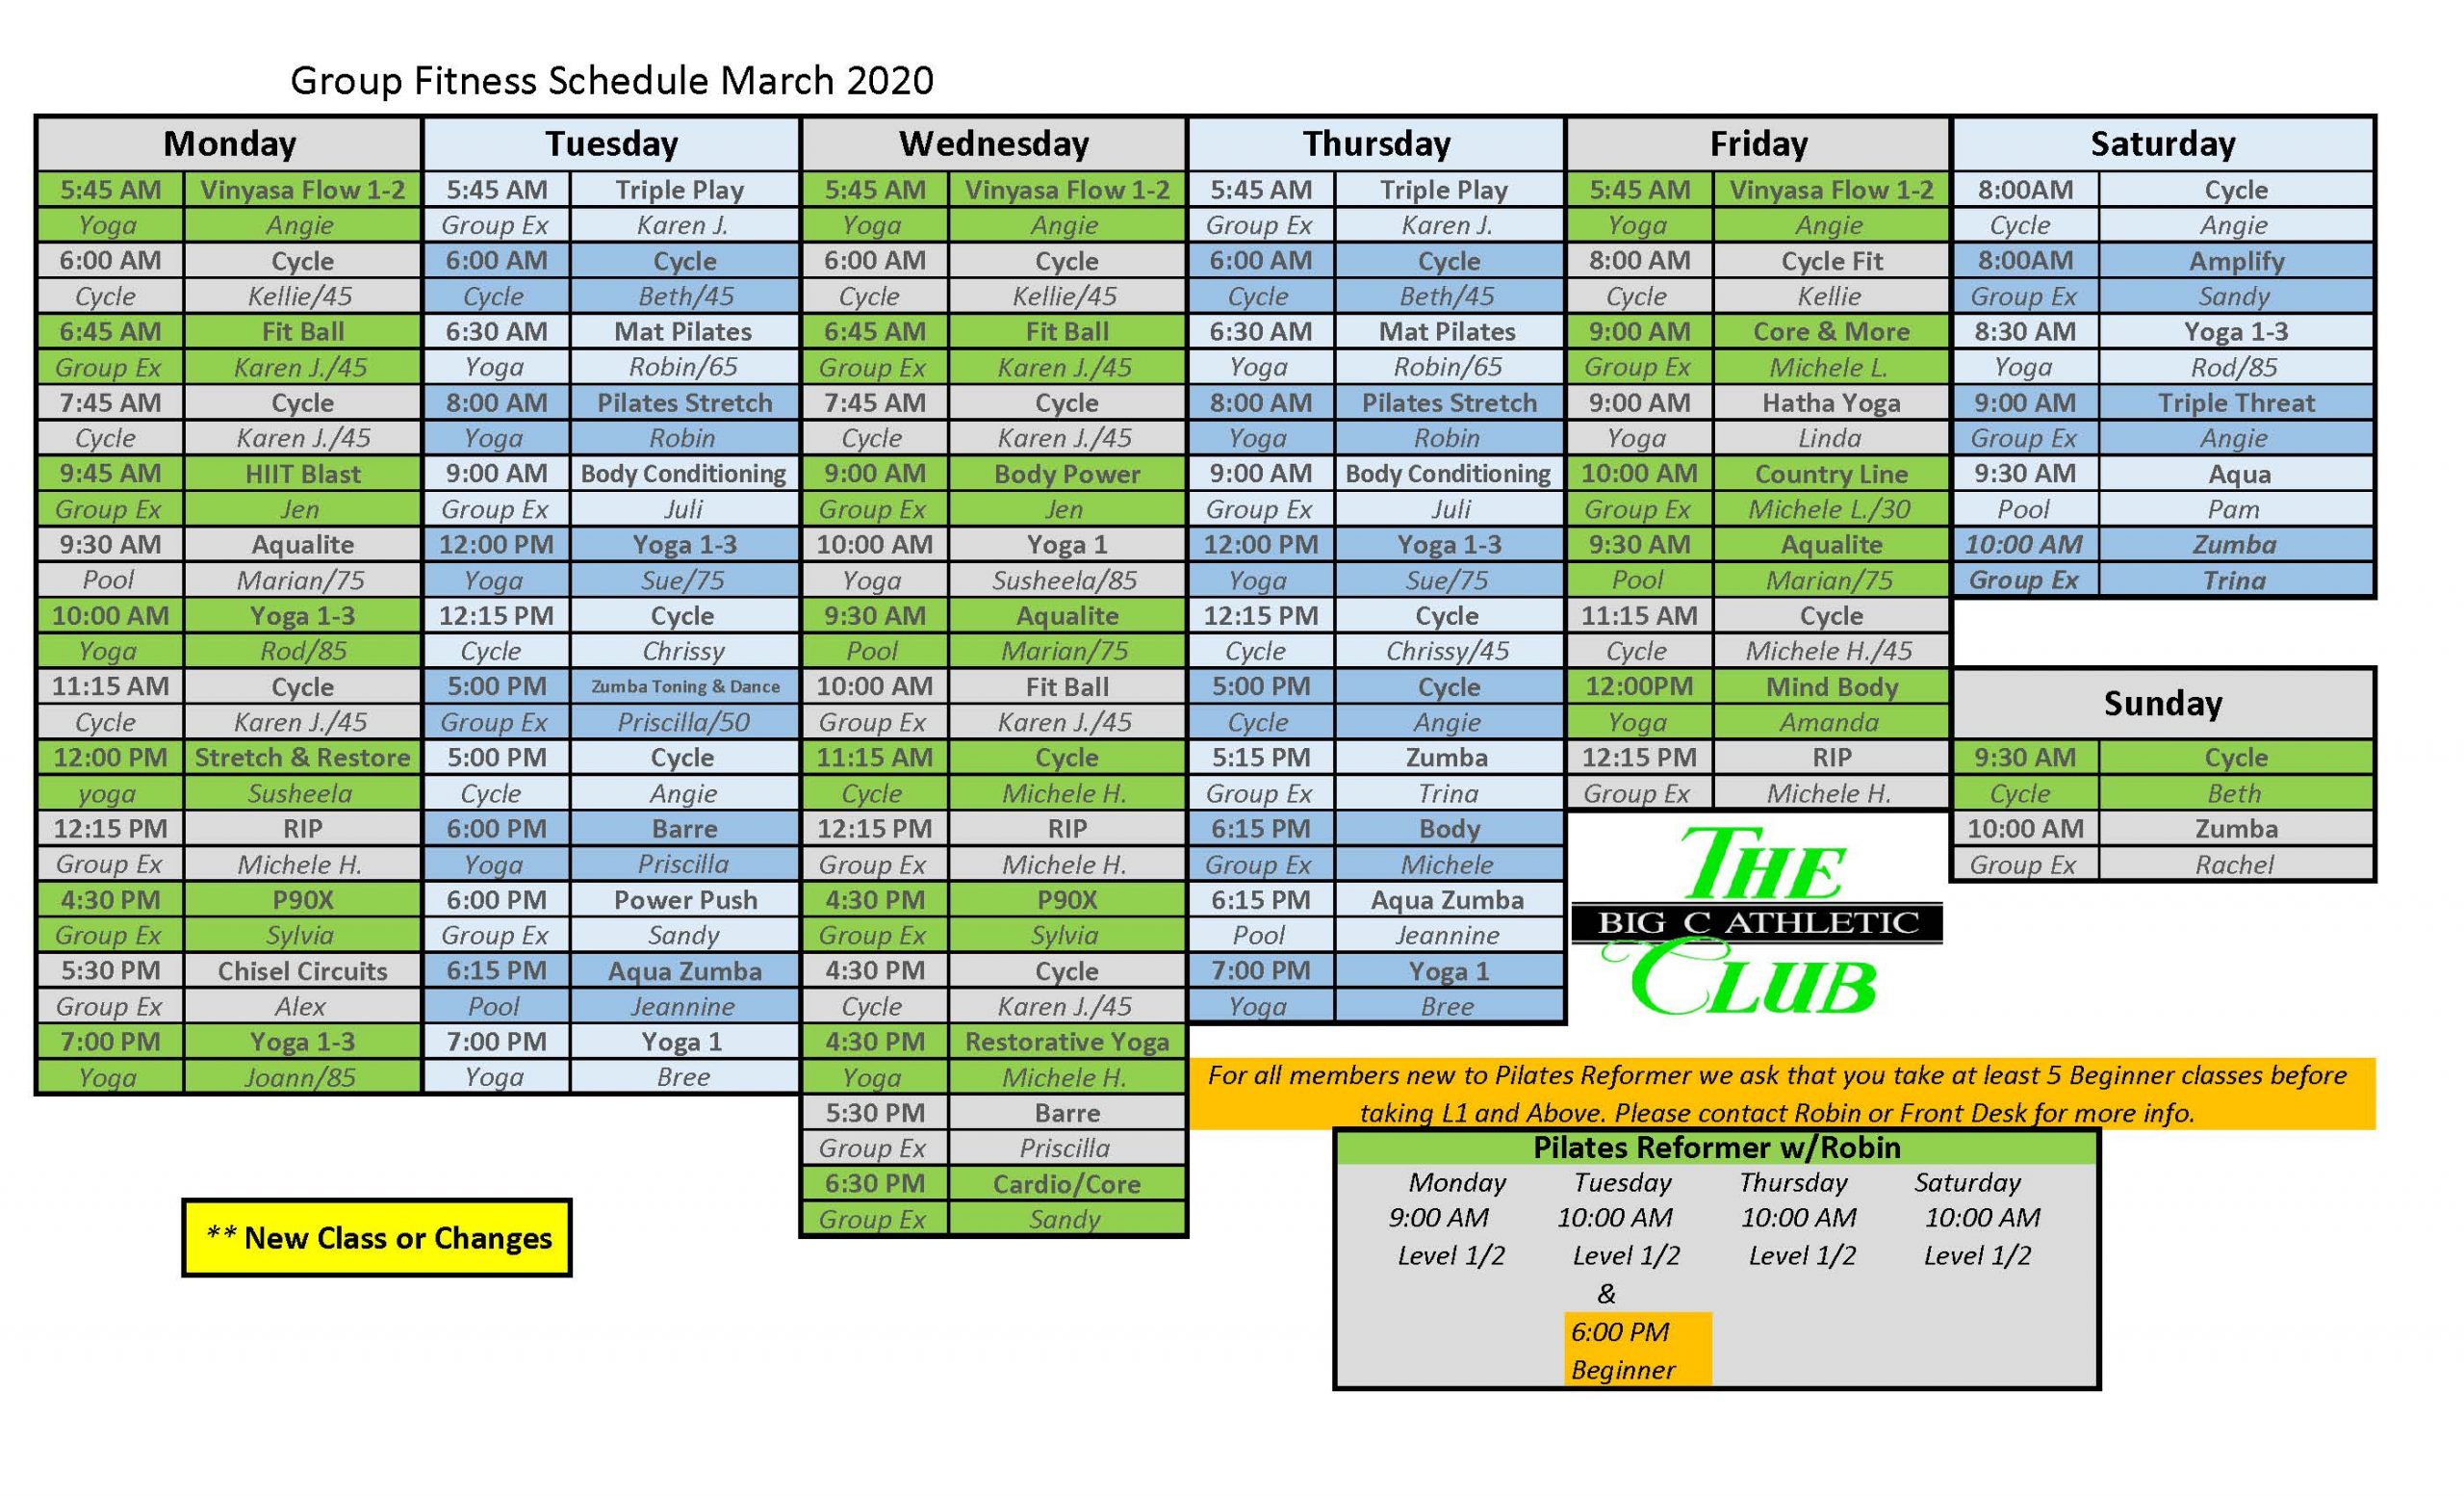 Class Schedule & Sub List – The Big C Athletic Club | We are a